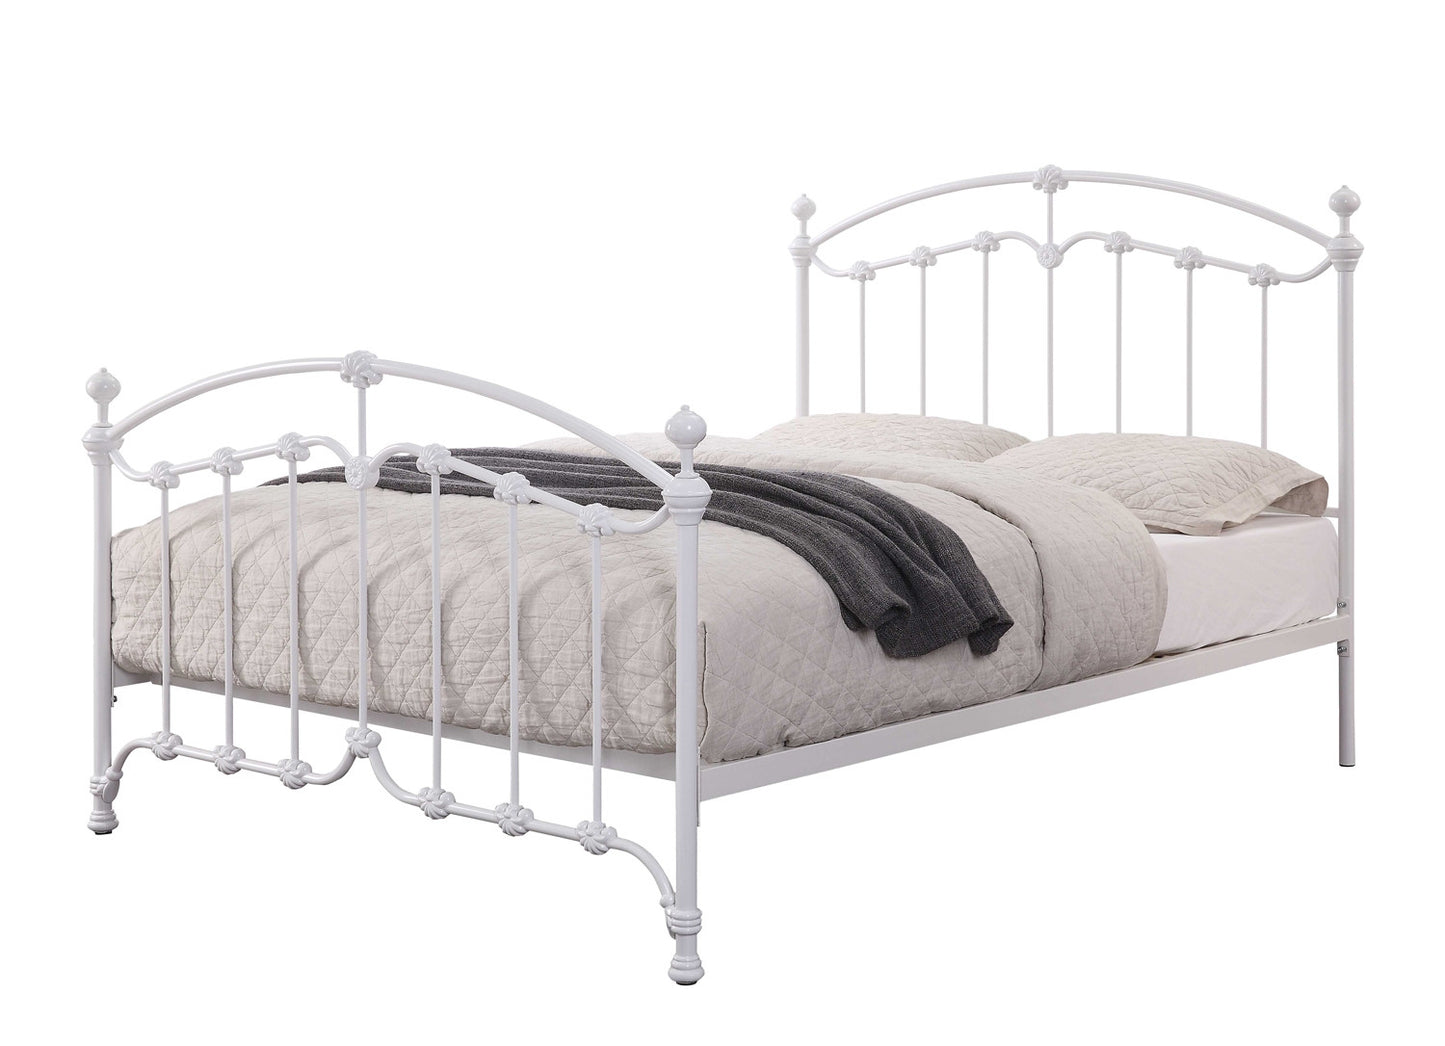 KATRINA WHITE SINGLE Size Cast and Wrought Iron Bed